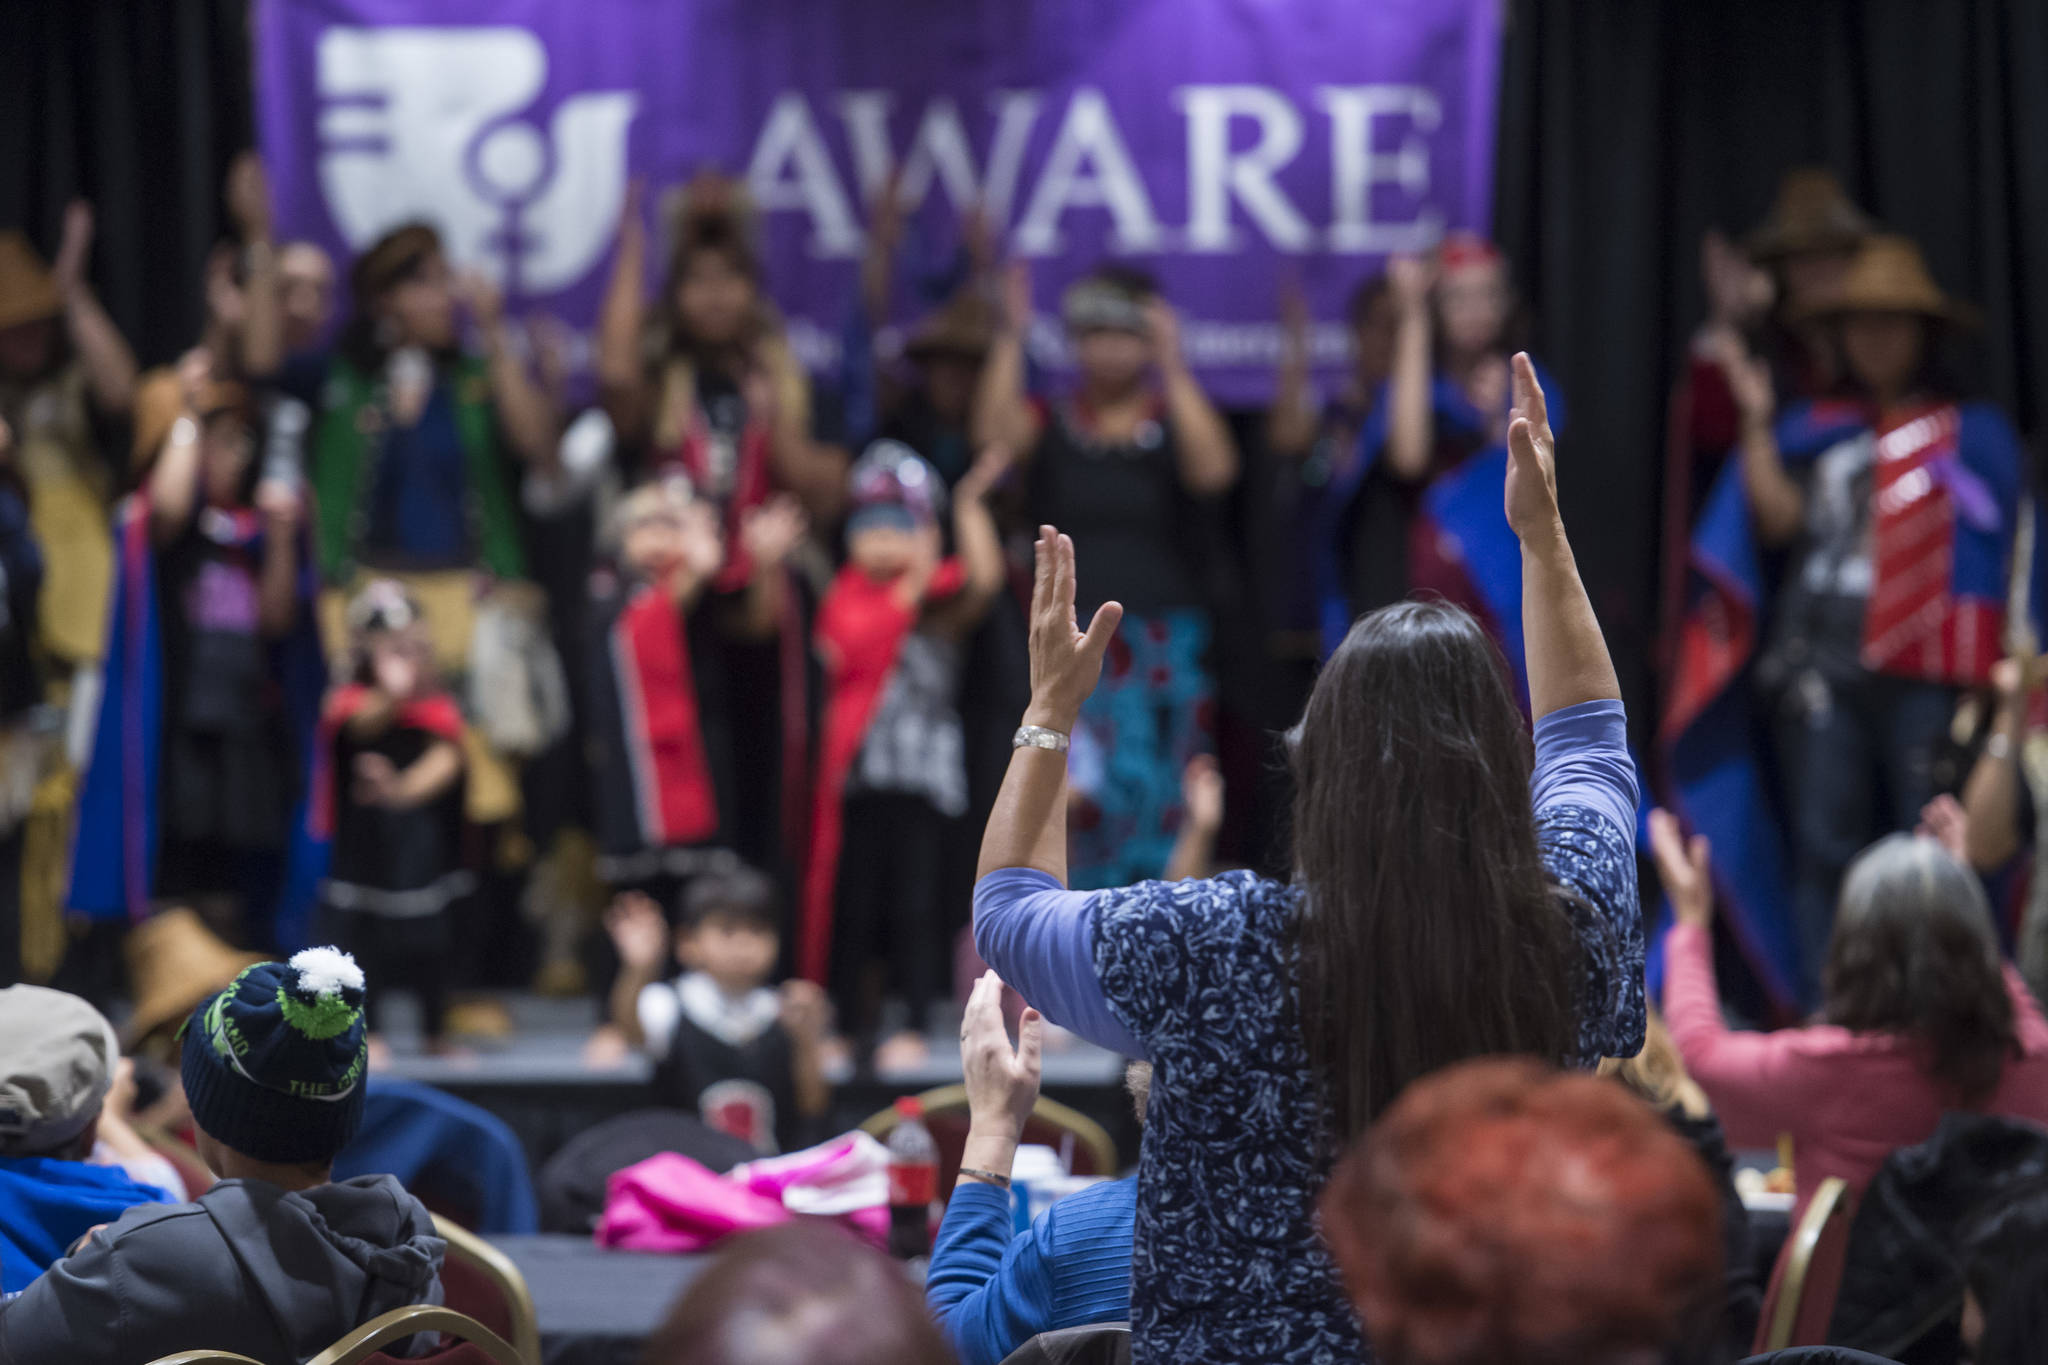 People pay tribute to the Woosh.ji.een Dance Group as they perform during a Celebrate Survivors gathering sponsored by Central Council Tlingit and Haida Indian Tribes of Alaska and AWARE in the Elizabeth Peratrovich Hall on Tuesday, Oct. 23, 2018. October is Domestic Violence Awareness Month. (Michael Penn | Juneau Empire)